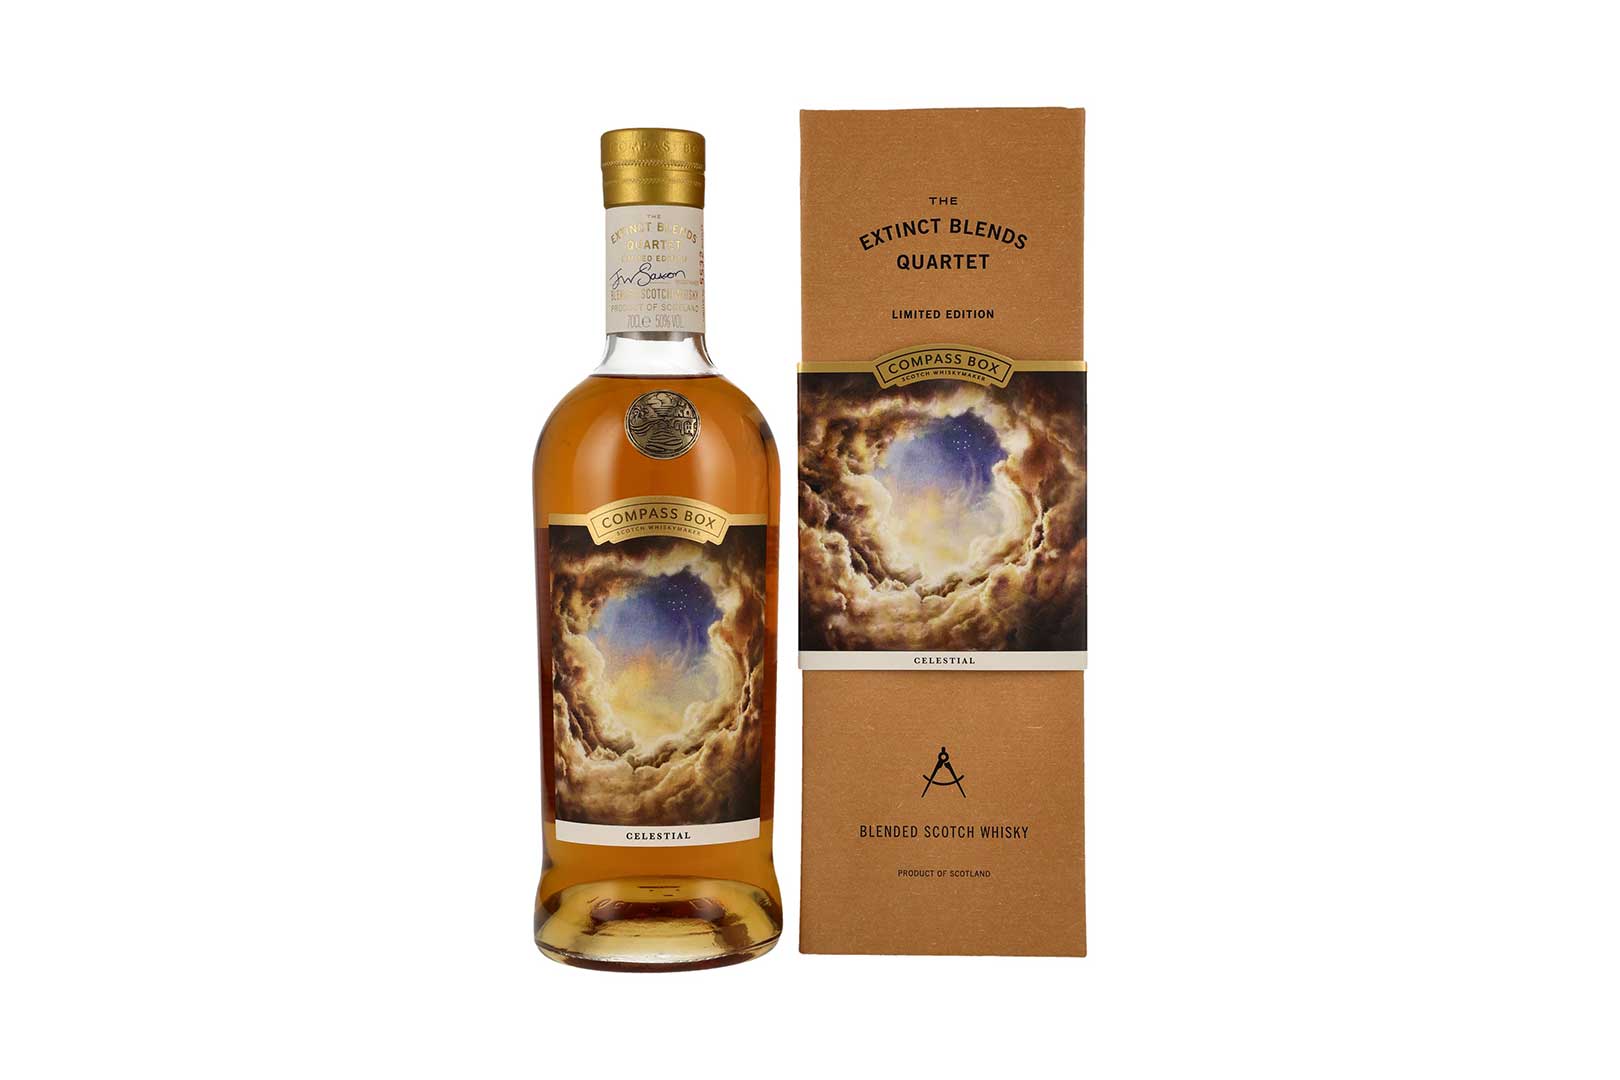 You are currently viewing Compass Box Extinct Blends Quartet Celestial